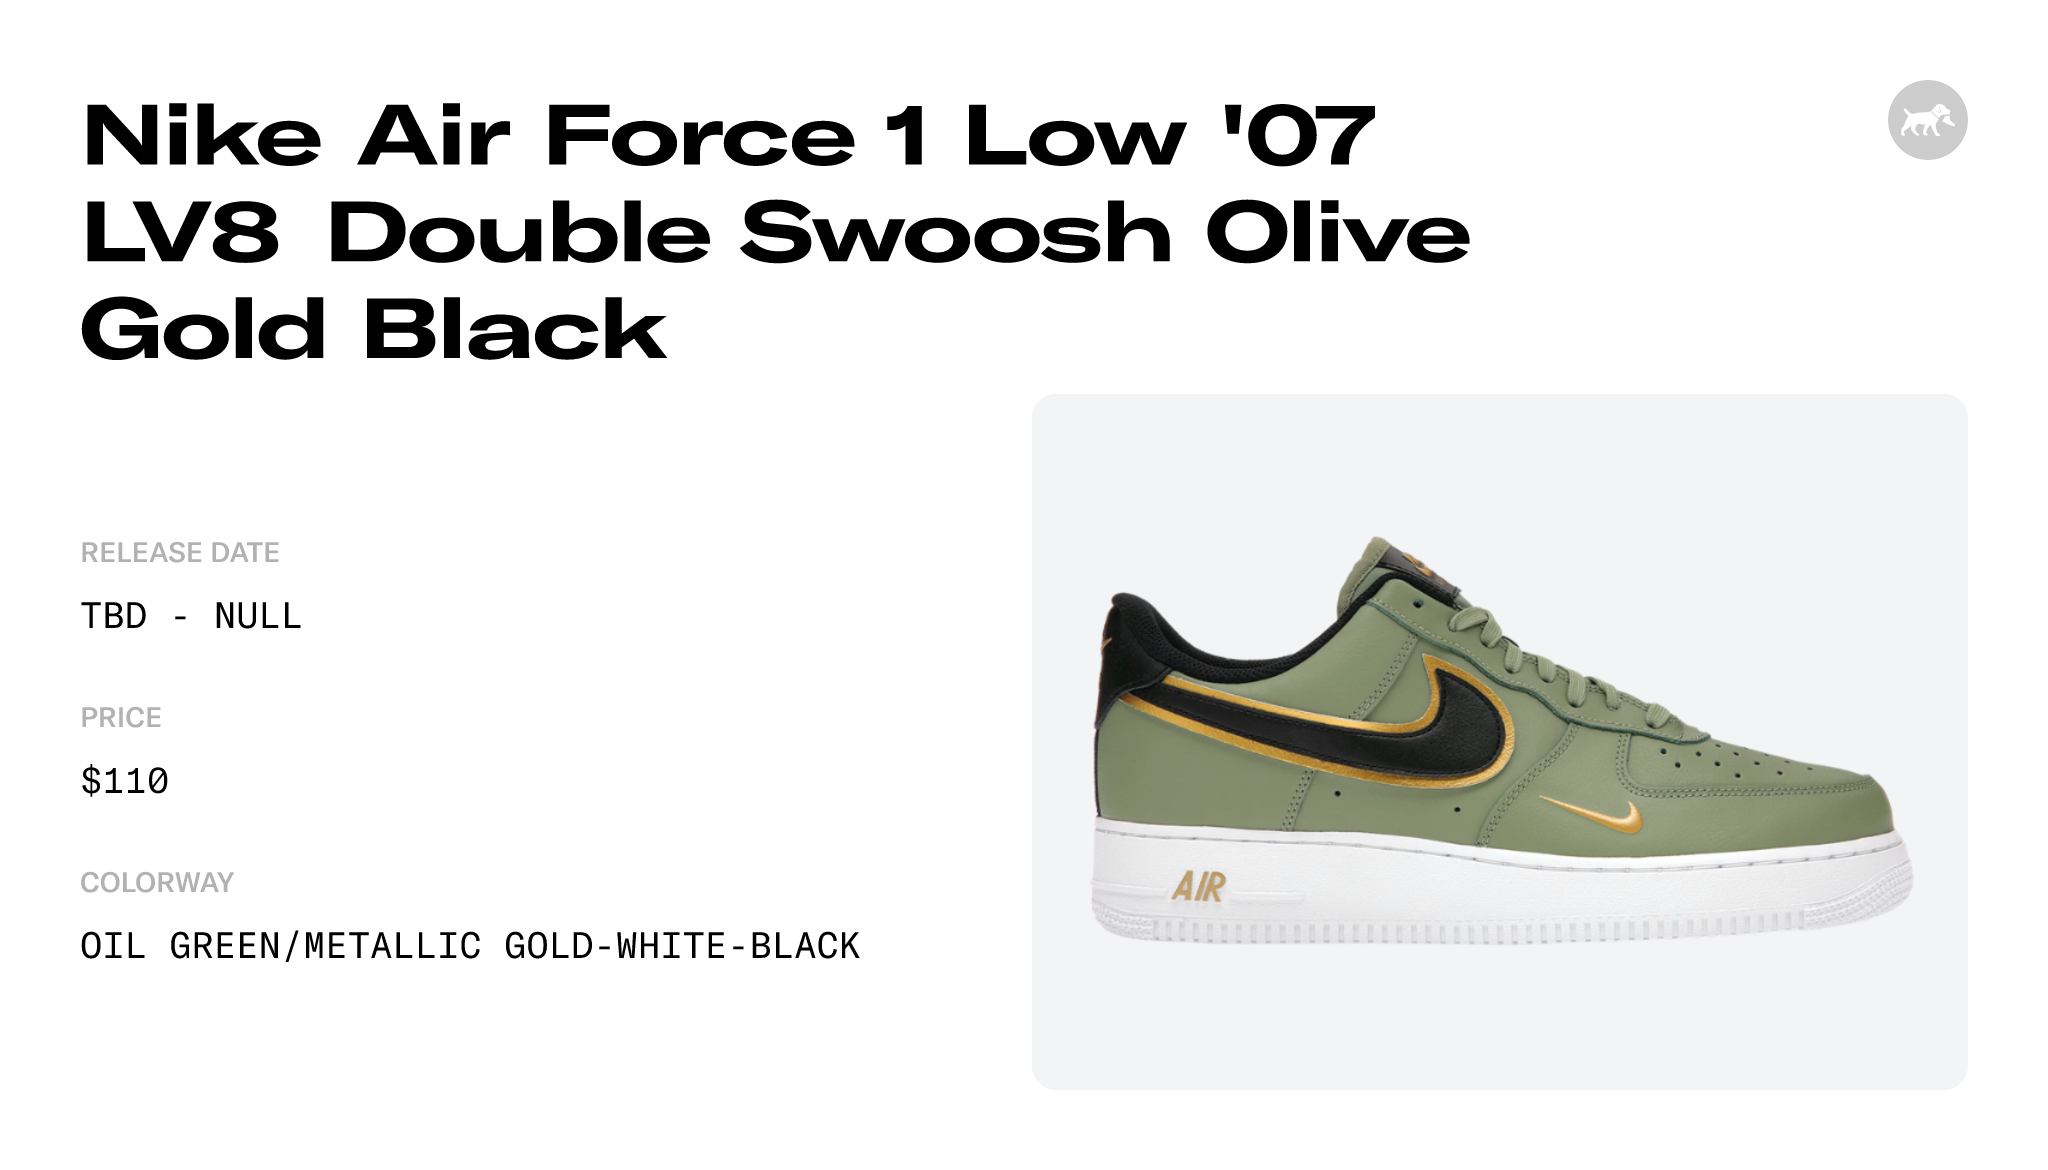 HOT Authentic - Nike Air Force 1 Low '07 LV8 Double Swoosh Olive